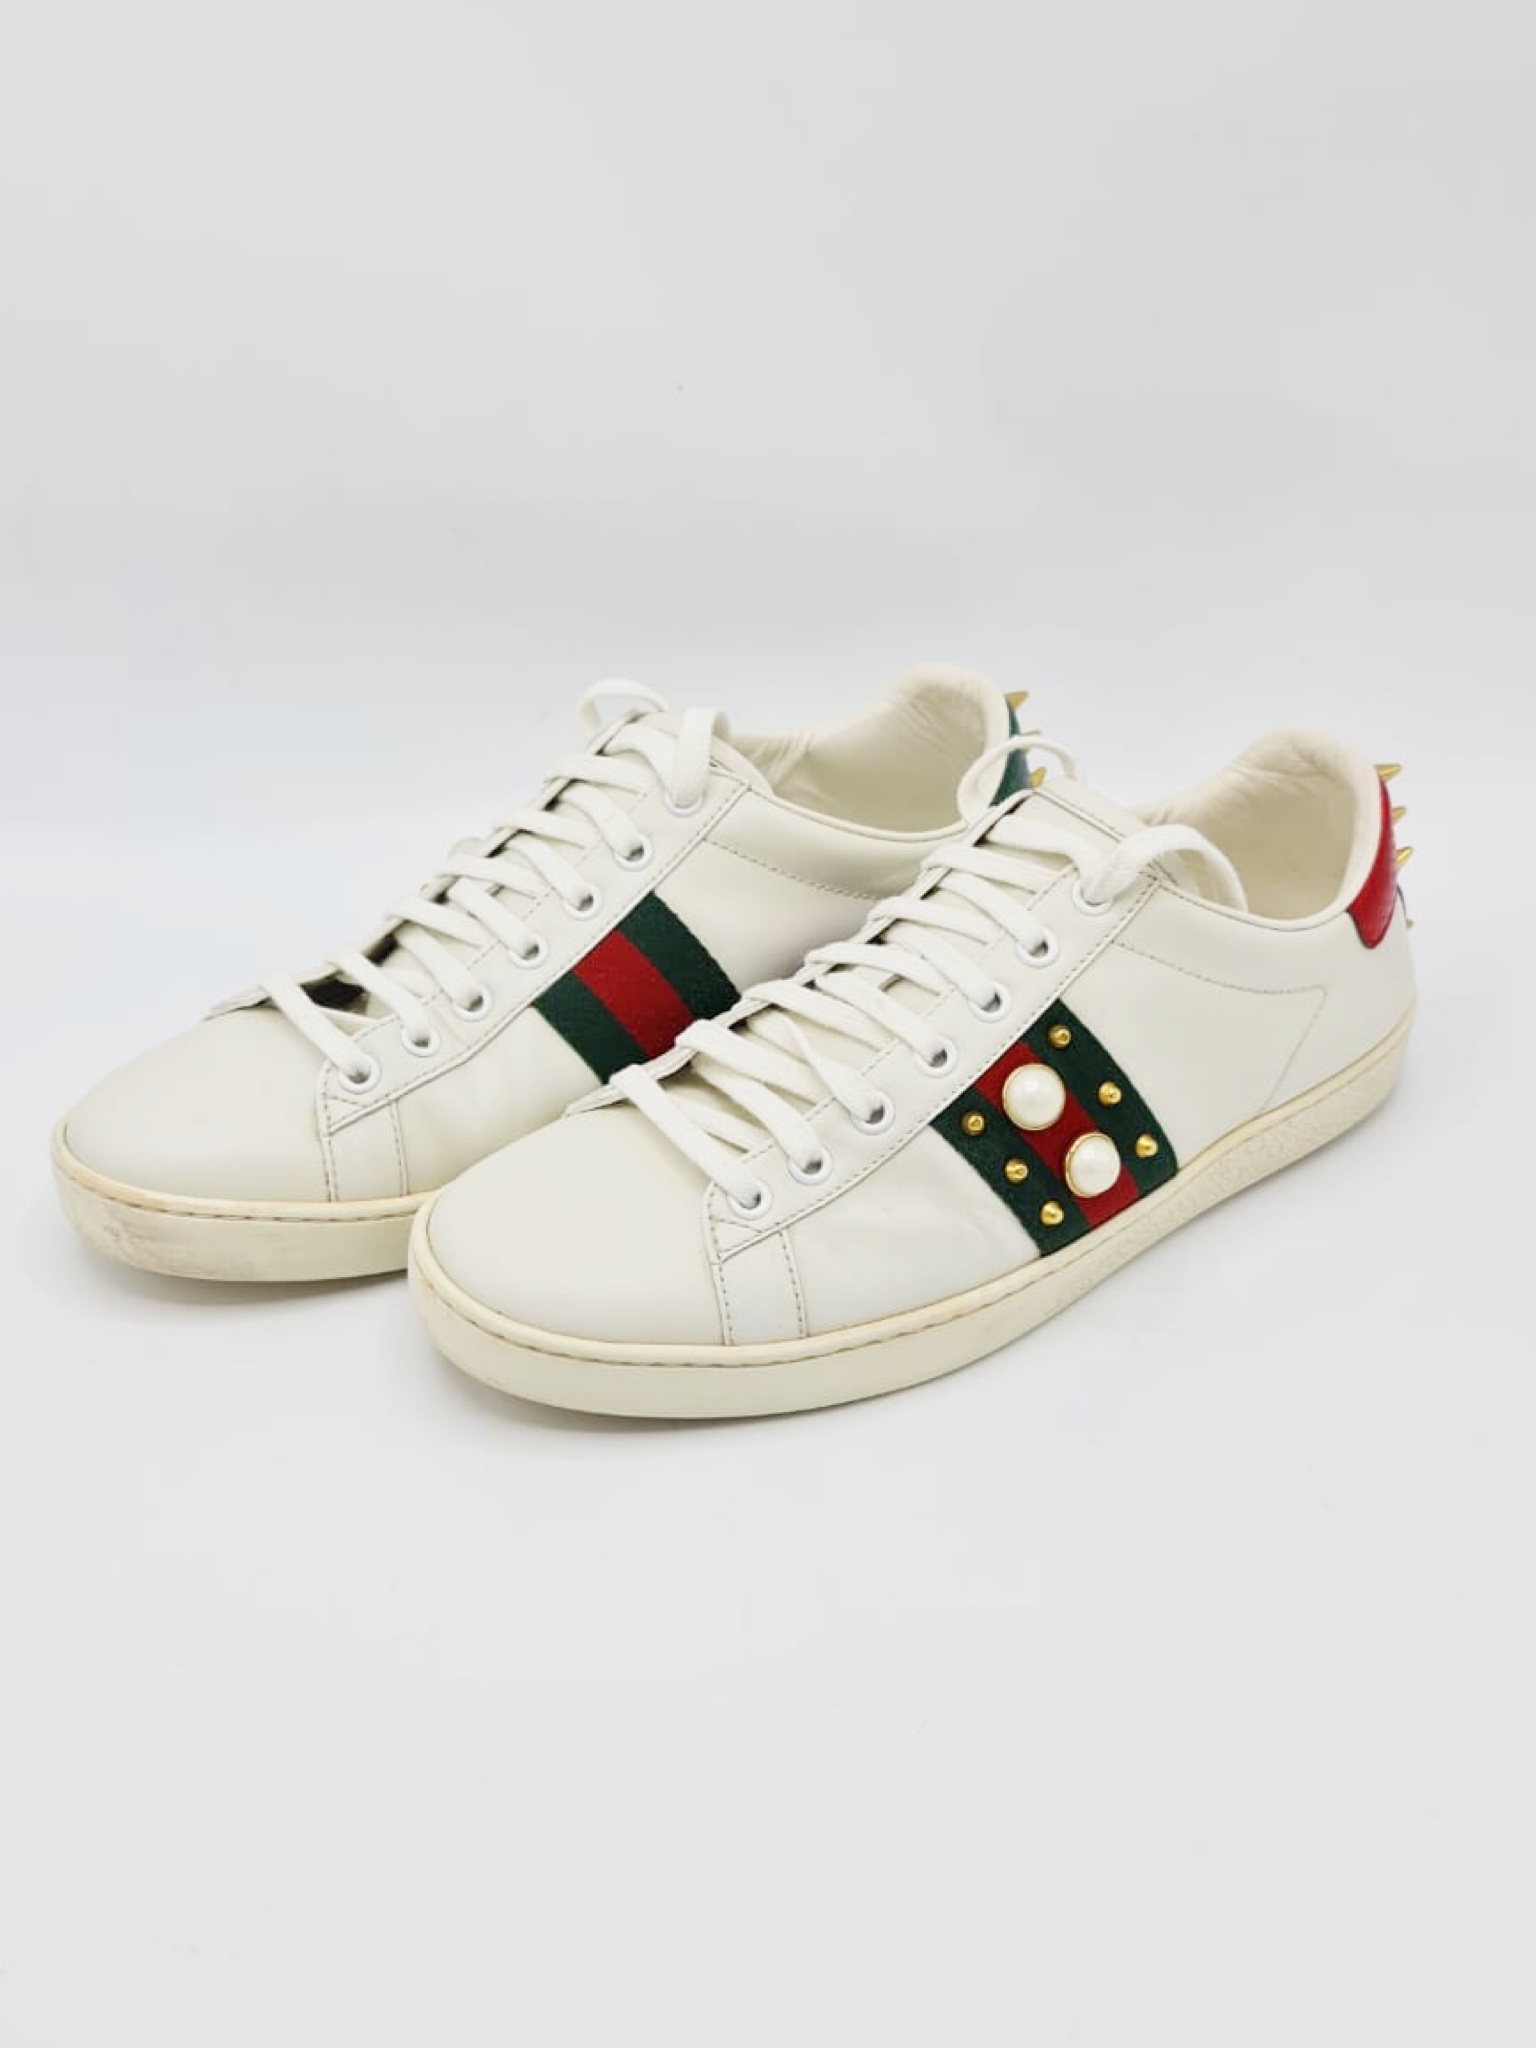 Gucci Ace Studded Pearl Sneakers (Size: 39) – My Paris Branded Station-Sell  Your Bags And Get Instant Cash